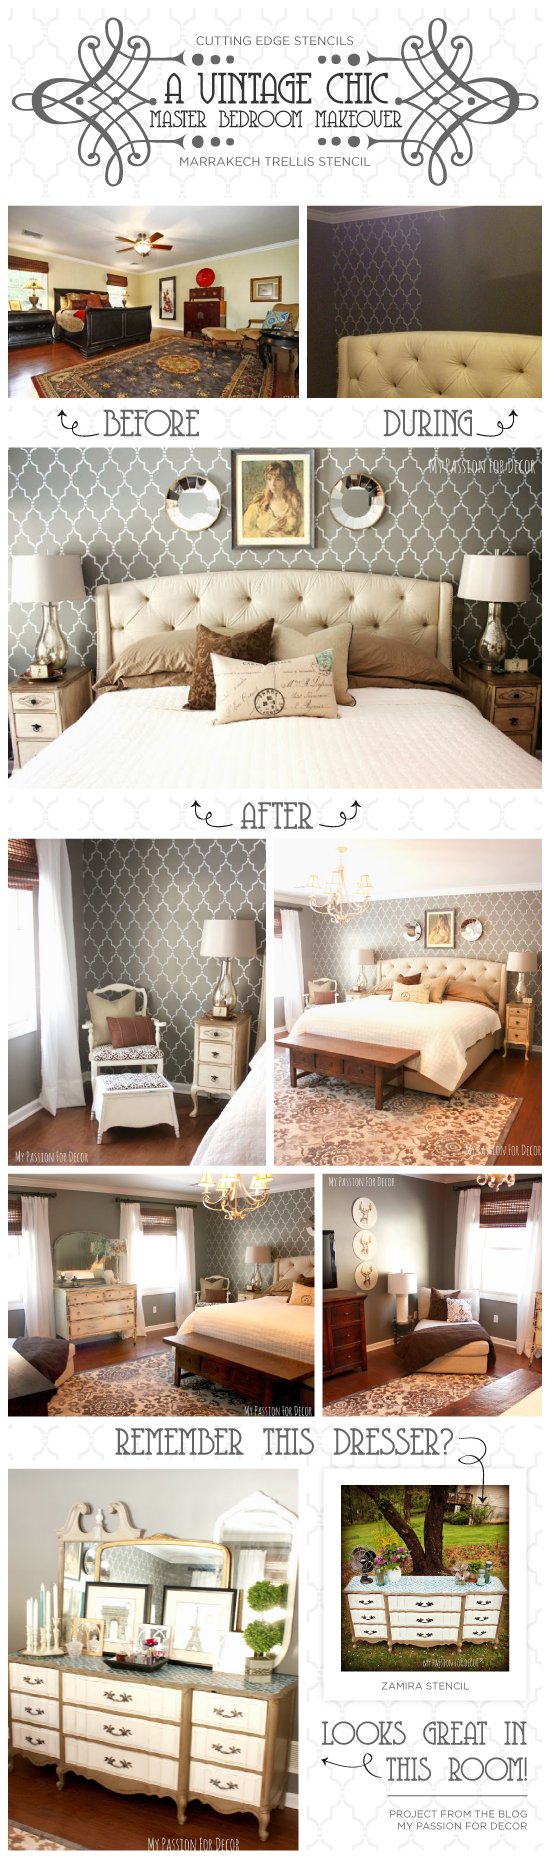 A gray DIY stenciled accent wall in a master bedroom using the Marrakech Trellis Stencil from Cutting Edge Stencils. http://www.cuttingedgestencils.com/moroccan-stencil-marrakech.htm